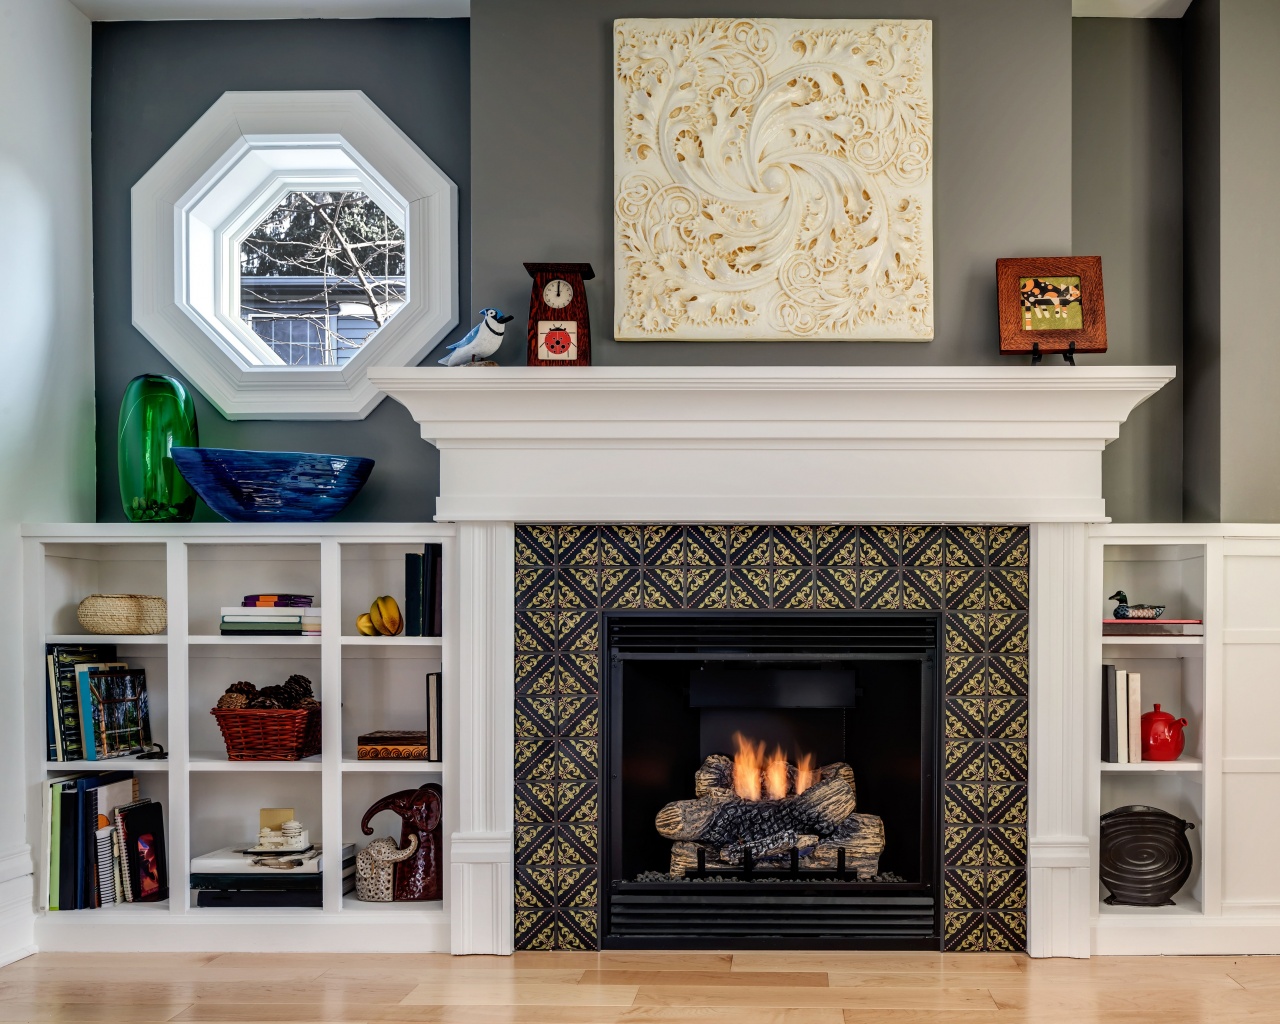 Fireplace Tile Design 2 Luxury How to Mount A Tv Over A Stone Fireplace – Fireplace Ideas